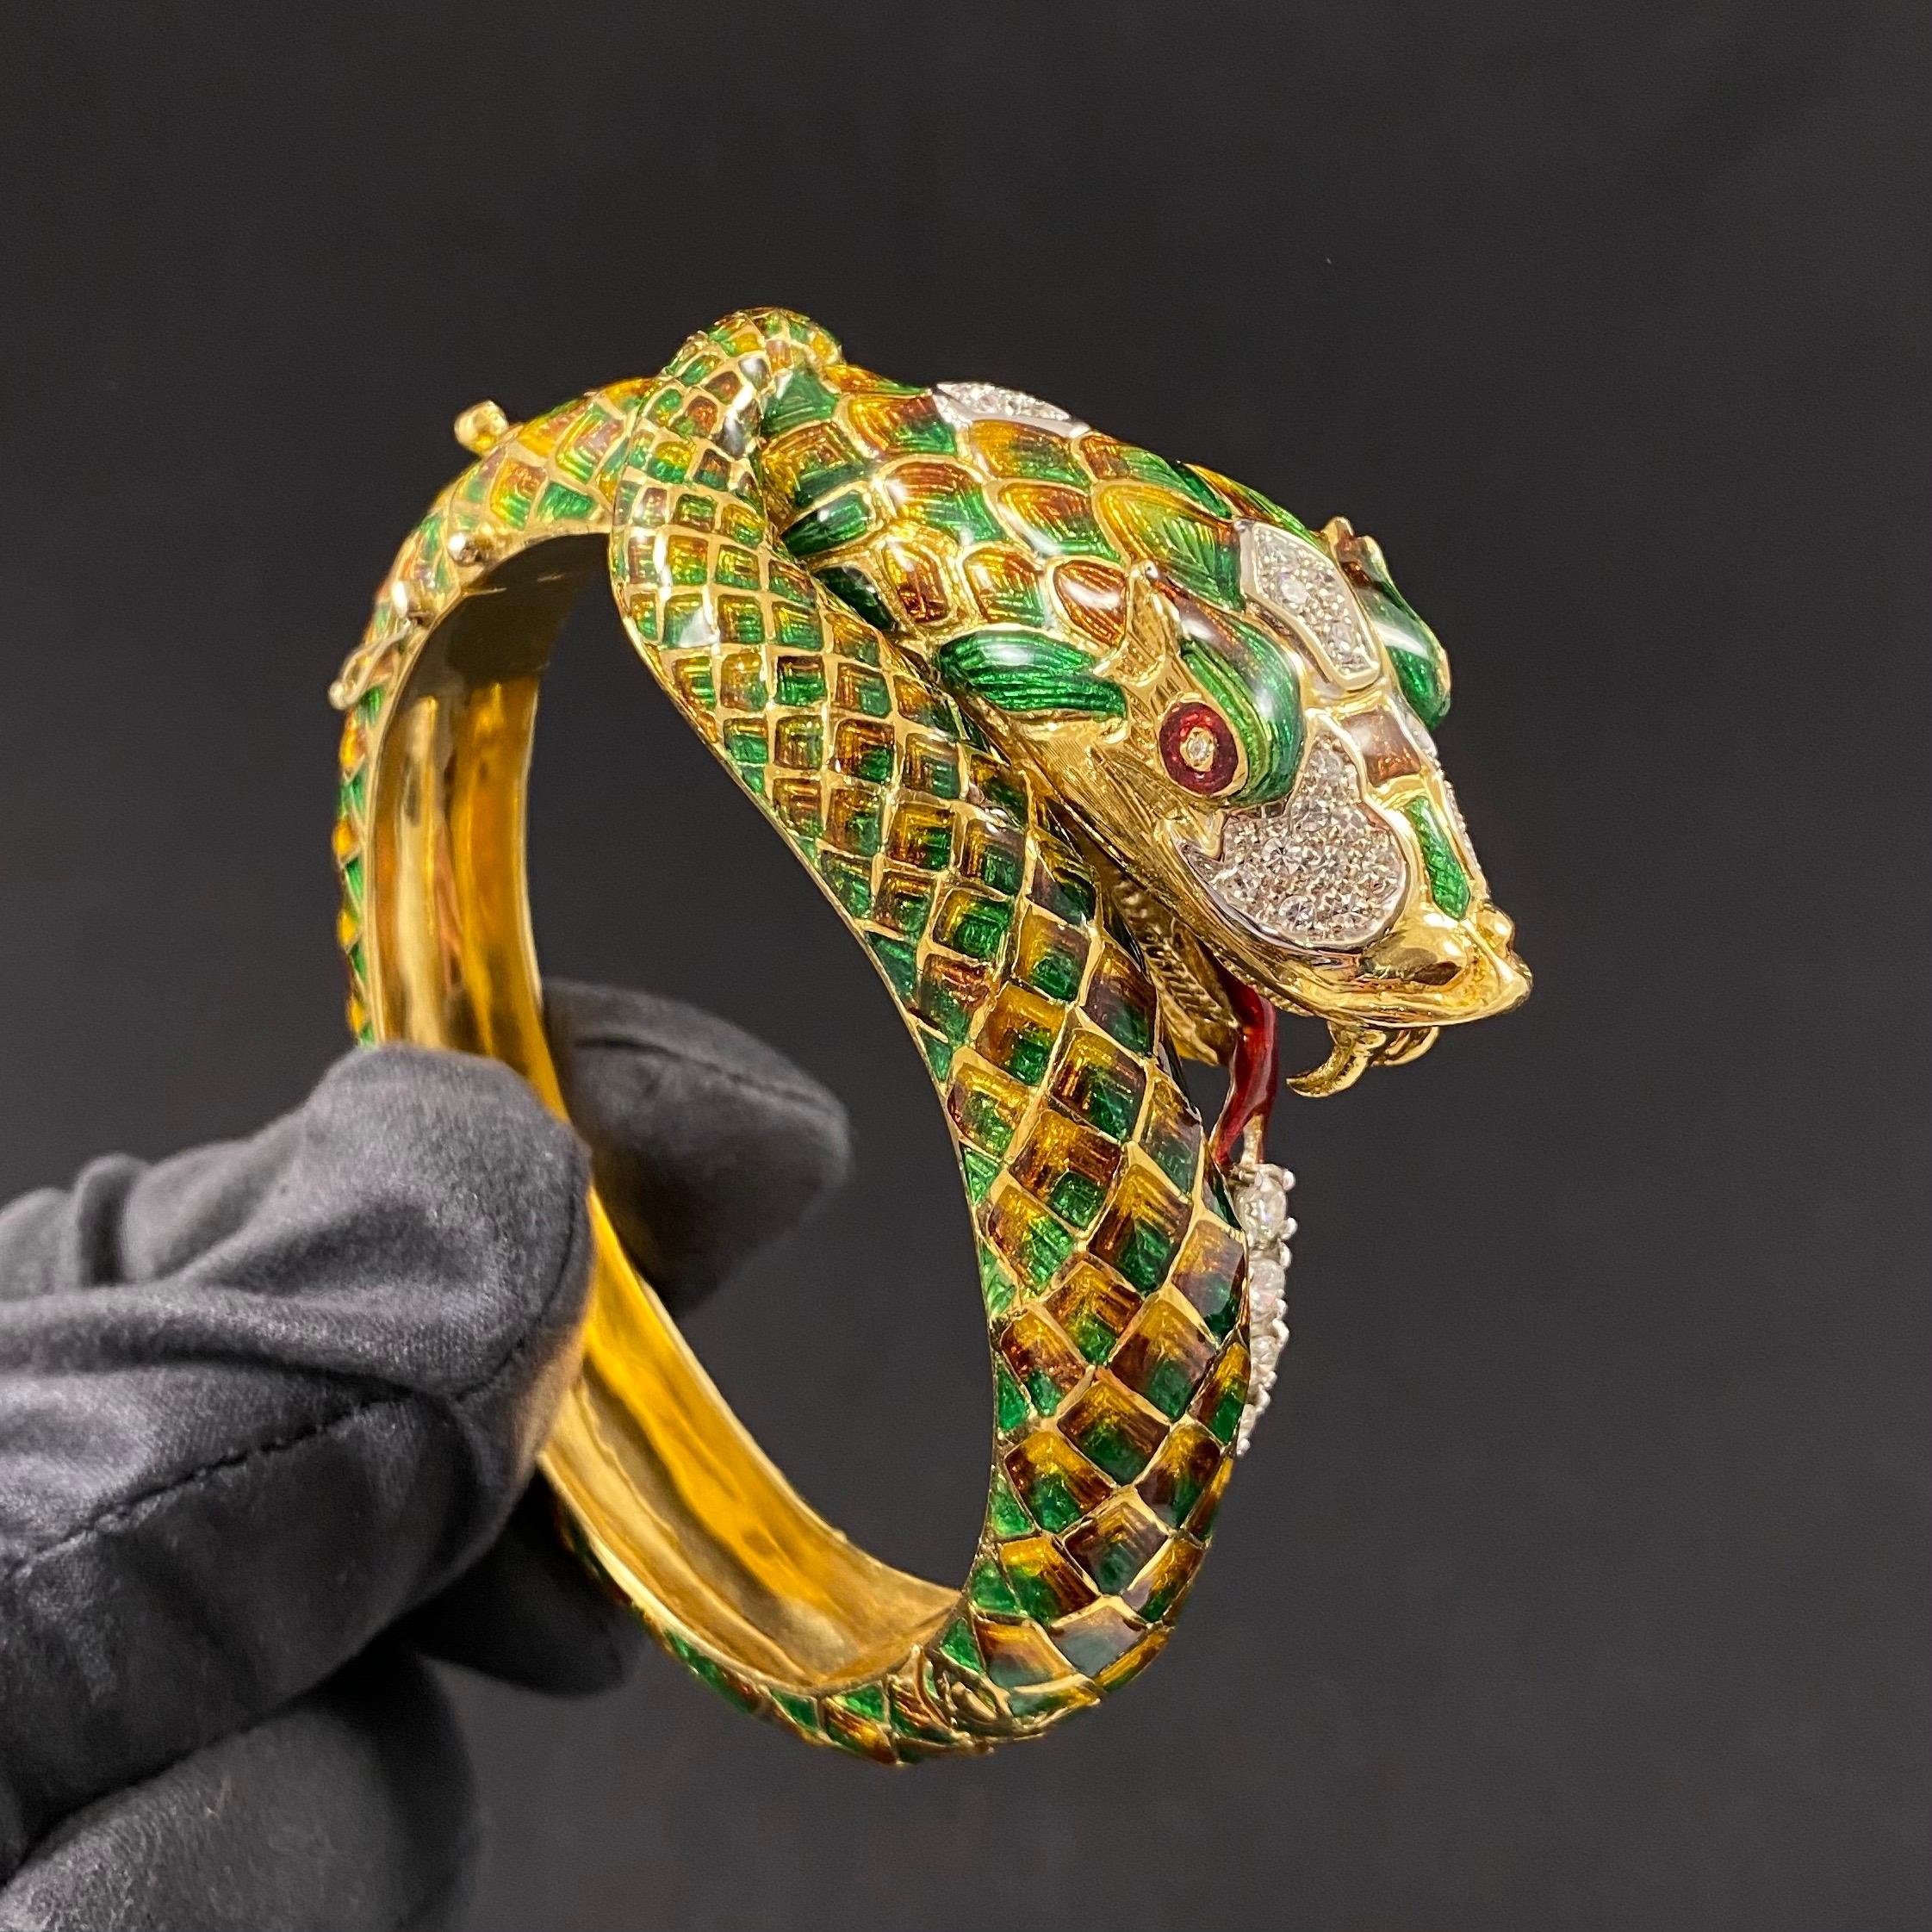 Vintage Diamond and Enamel Serpent Hinged Bangle Bracelet in 19.2kt Yellow Gold, Portugal, circa 1970. Designed as a coiled snake with the mouth open, depicted as if eating a row of four round brilliant-cut diamonds. The snake is decorated